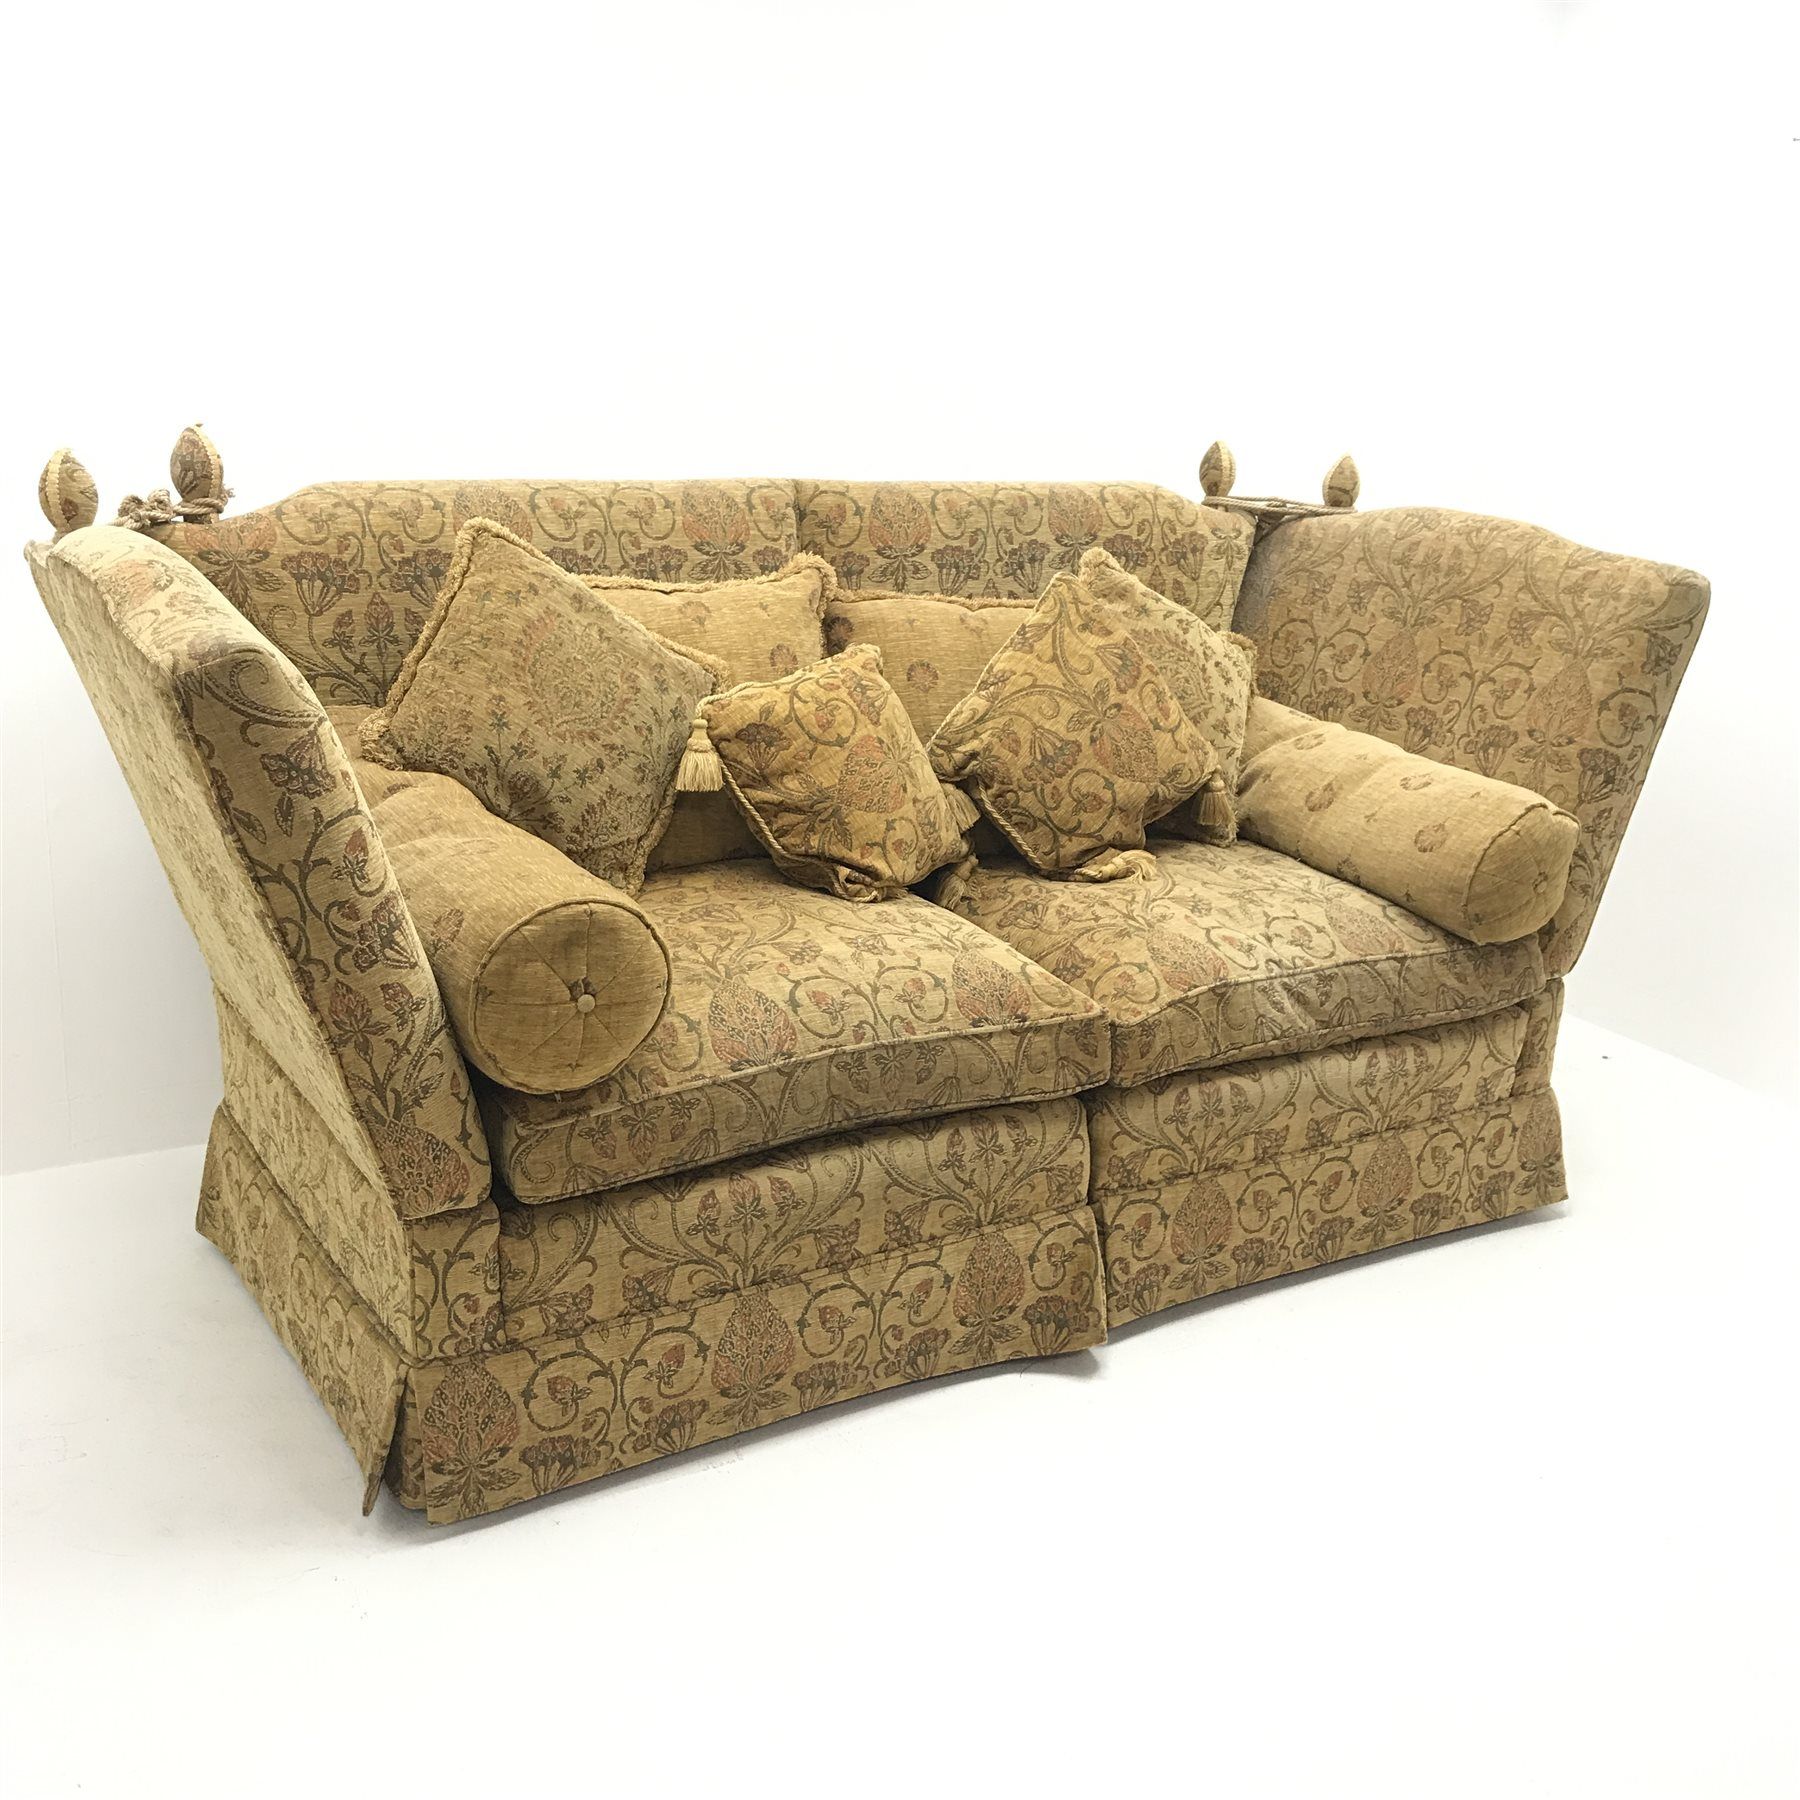 Knowle Style Two Seat Sofa, Upholstered In Traditional Floral Patterned Regarding Sofas In Pattern (View 7 of 20)